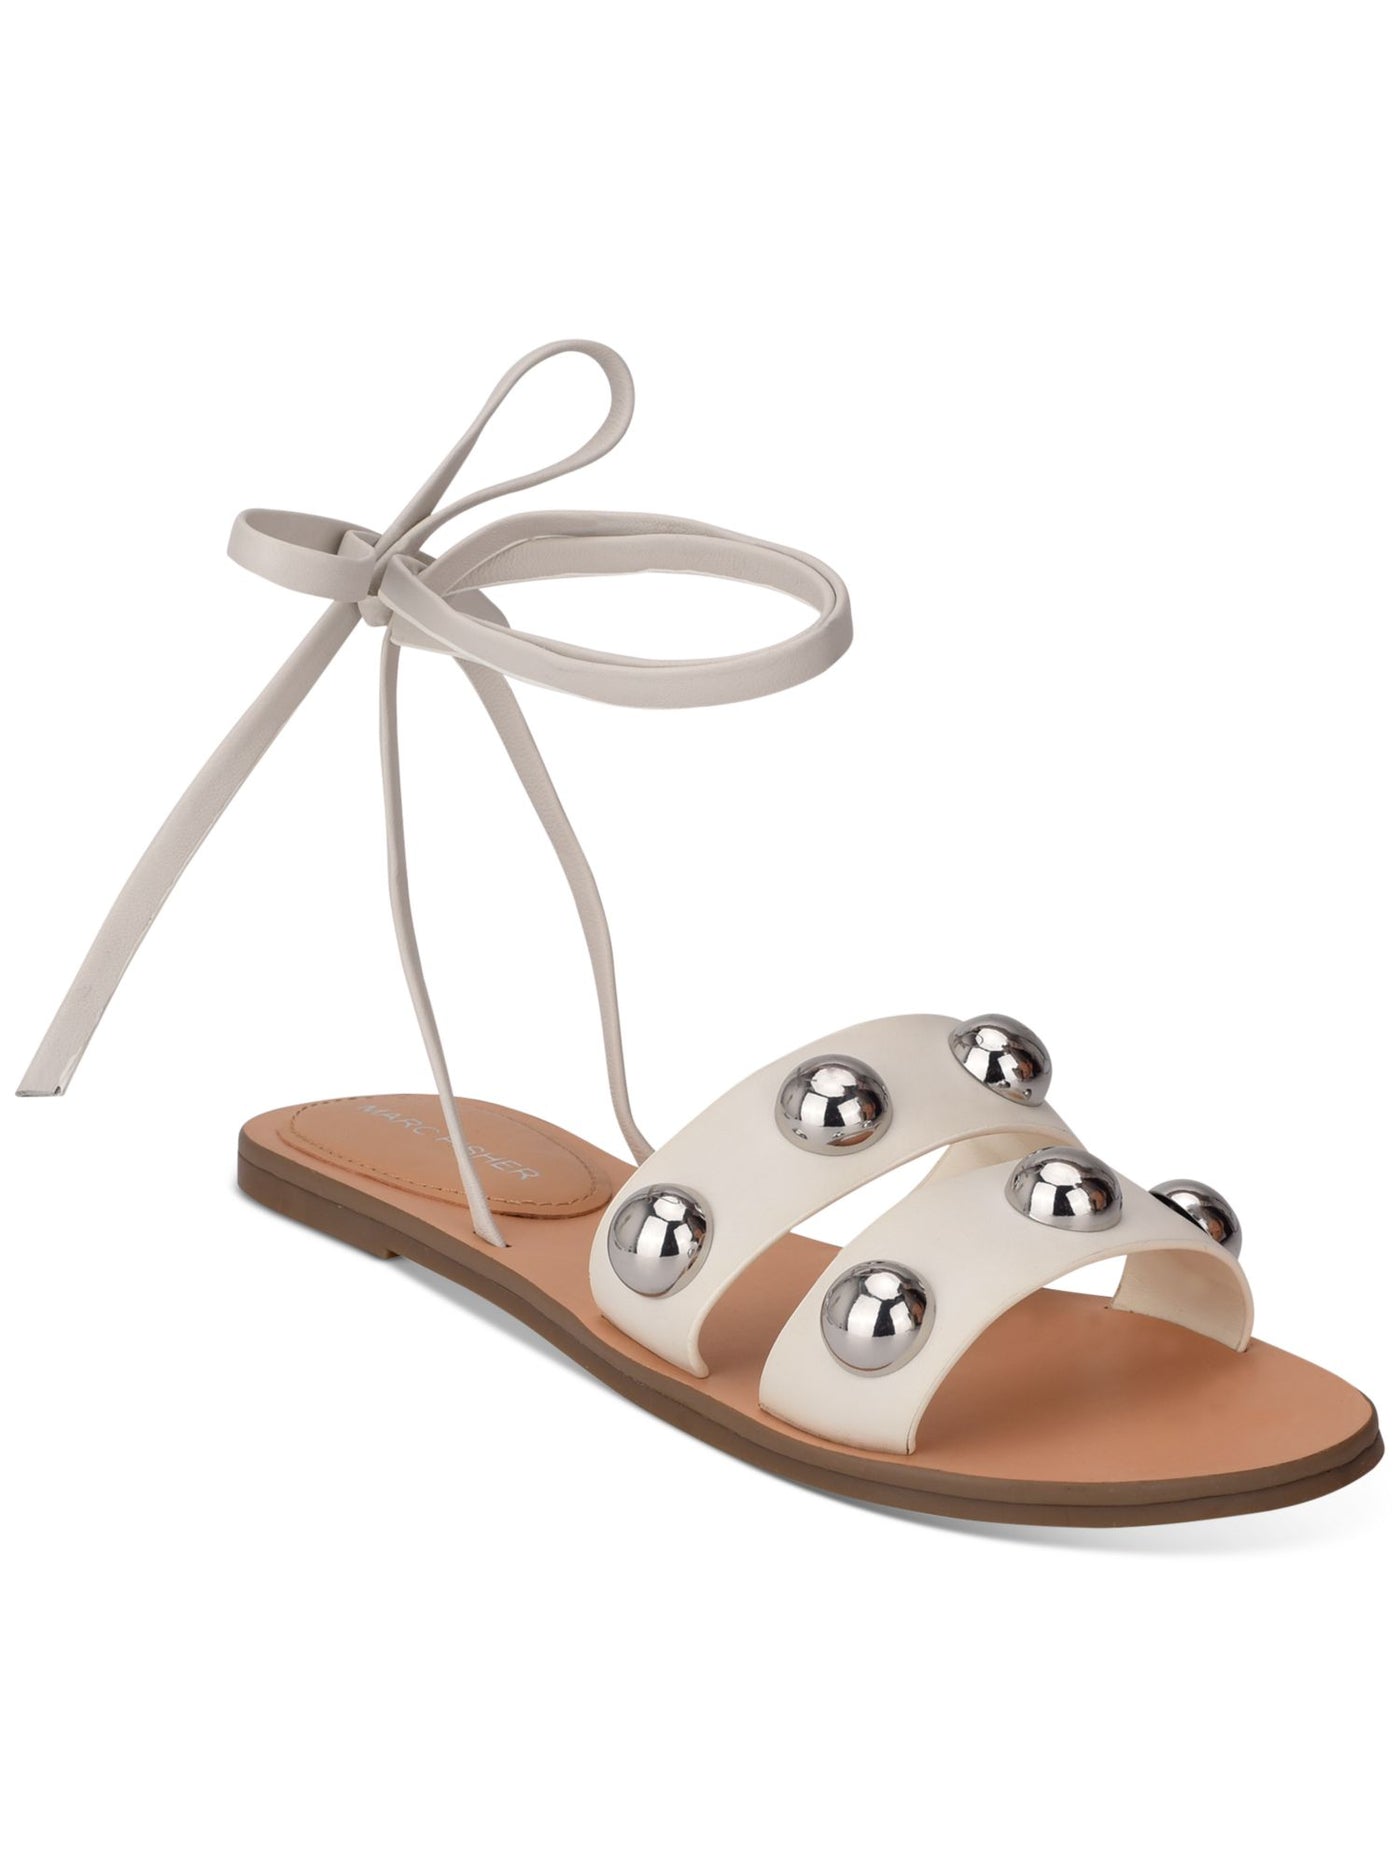 MARC FISHER Womens Ivory Studded Padded Bryony Round Toe Lace-Up Leather Sandals Shoes 7 M